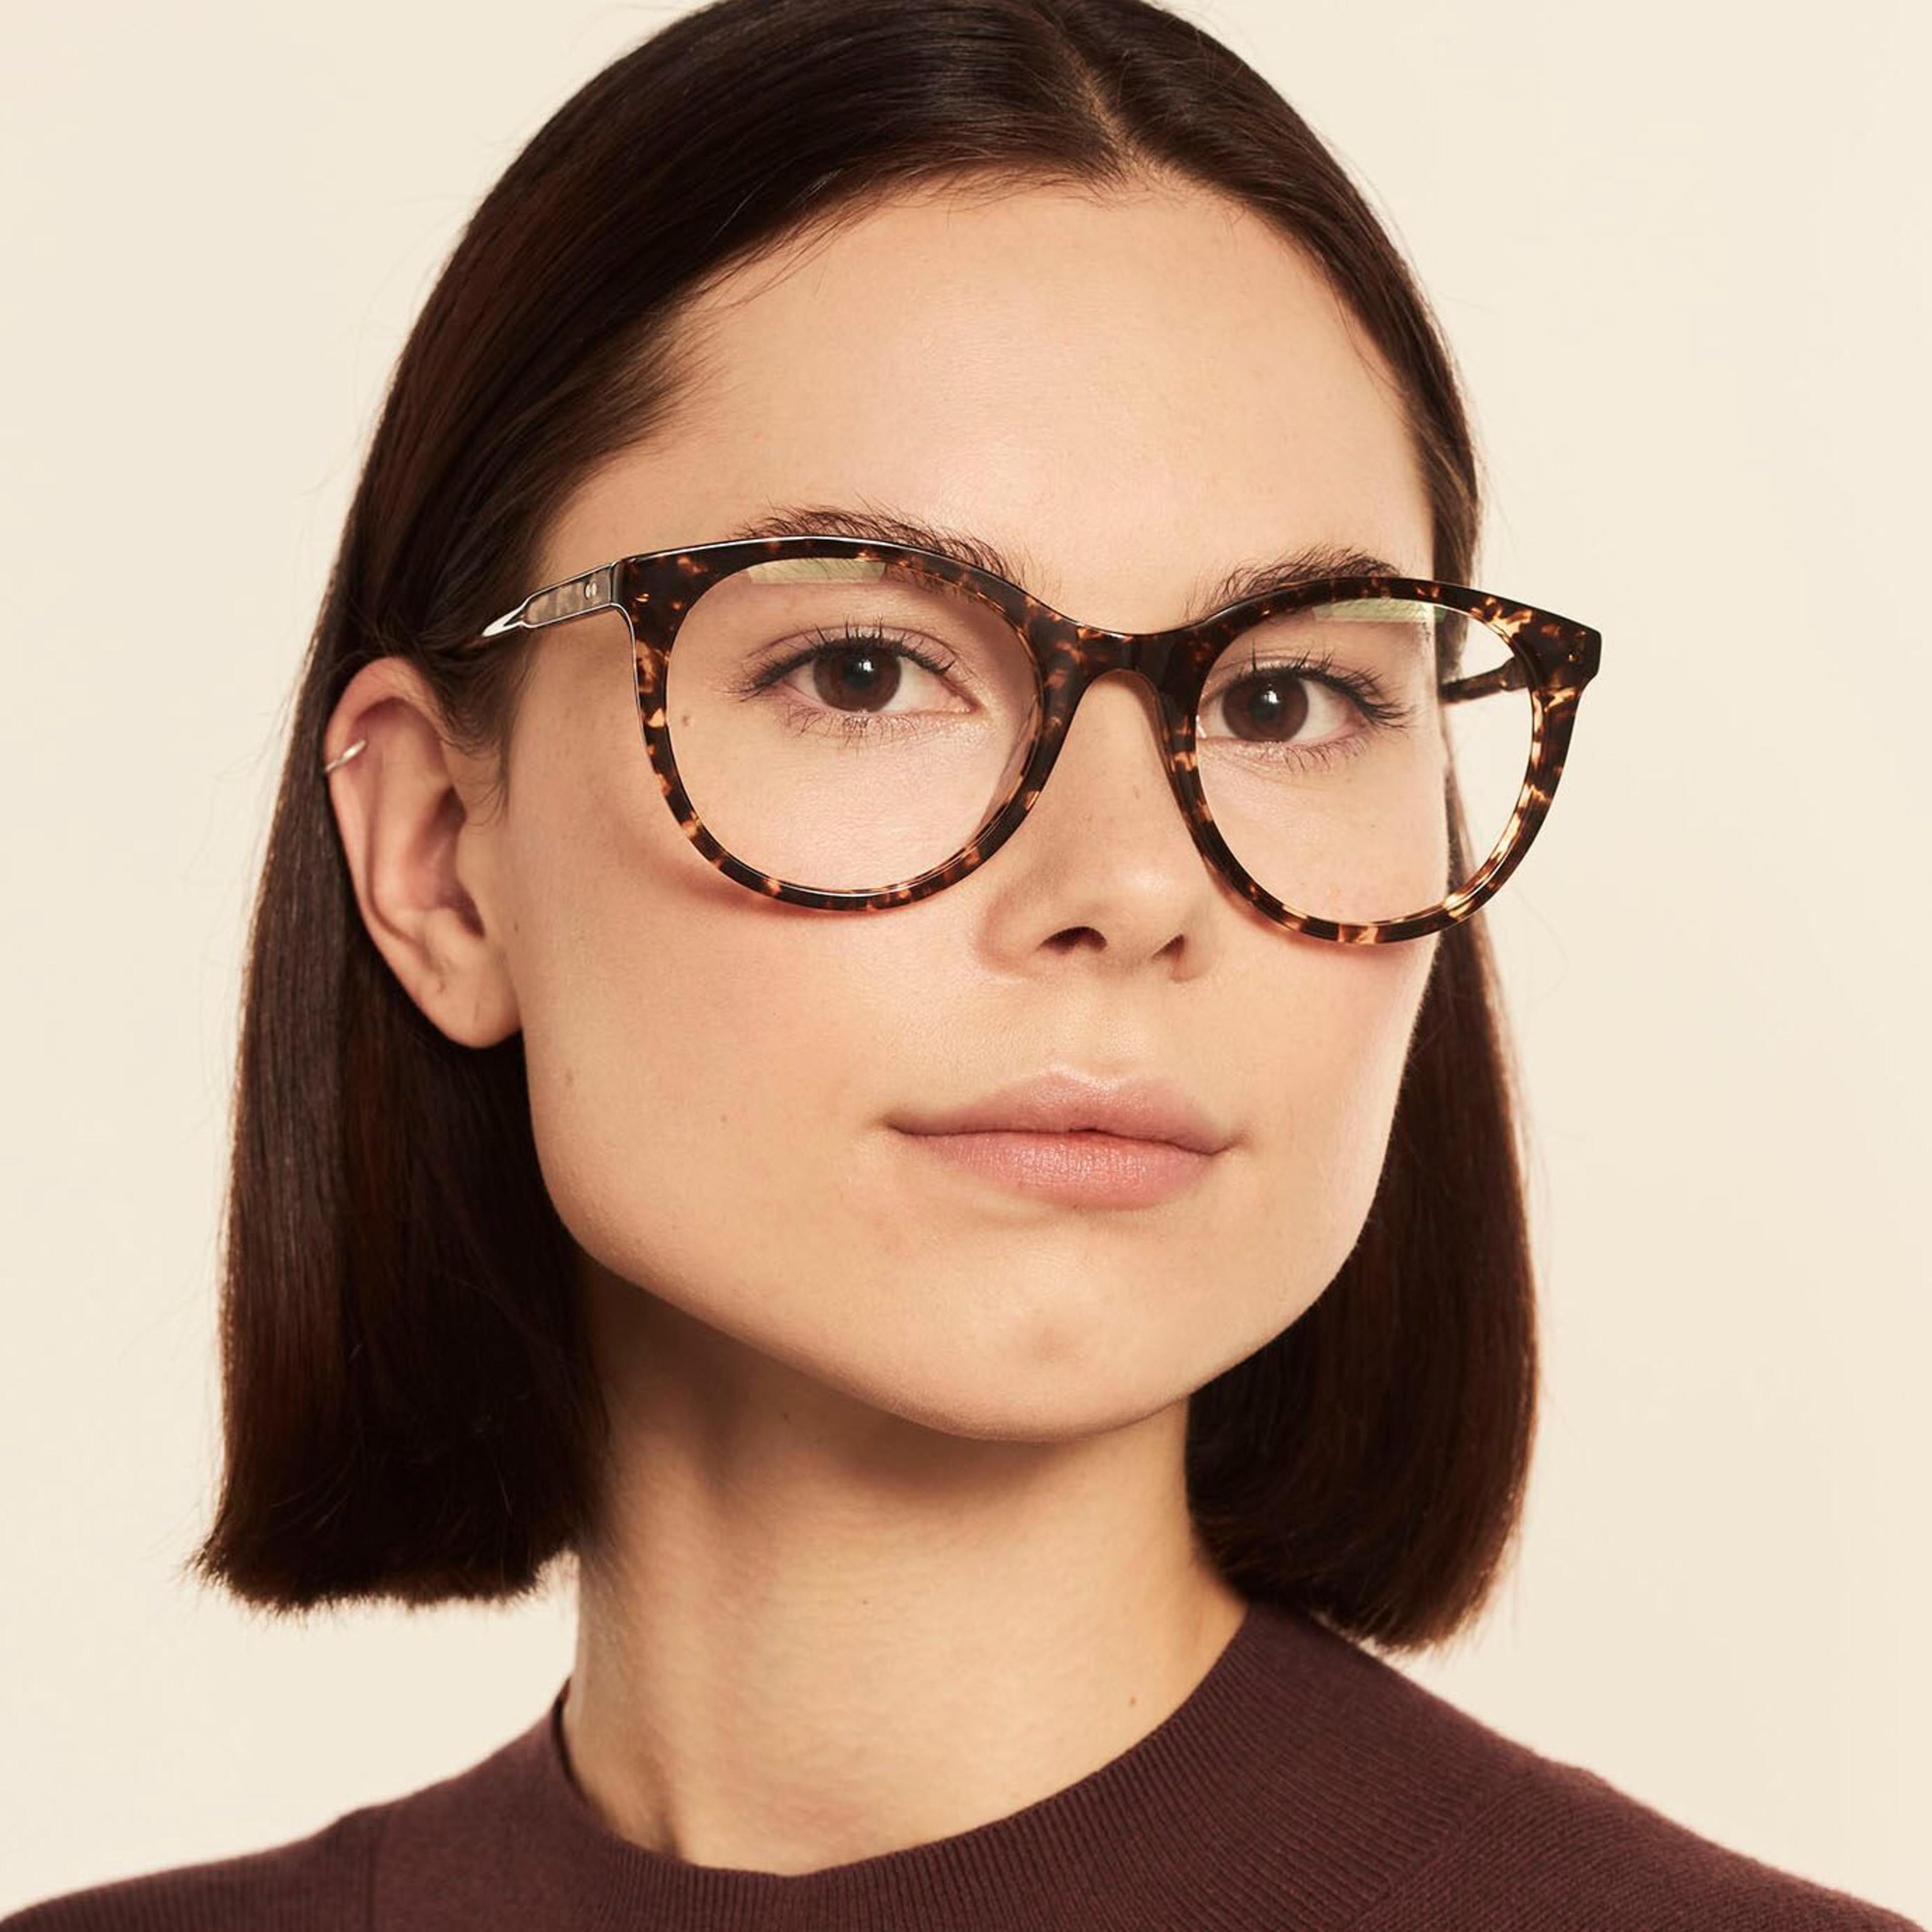 Ace & Tate Glasses | oval Acetate in Brown